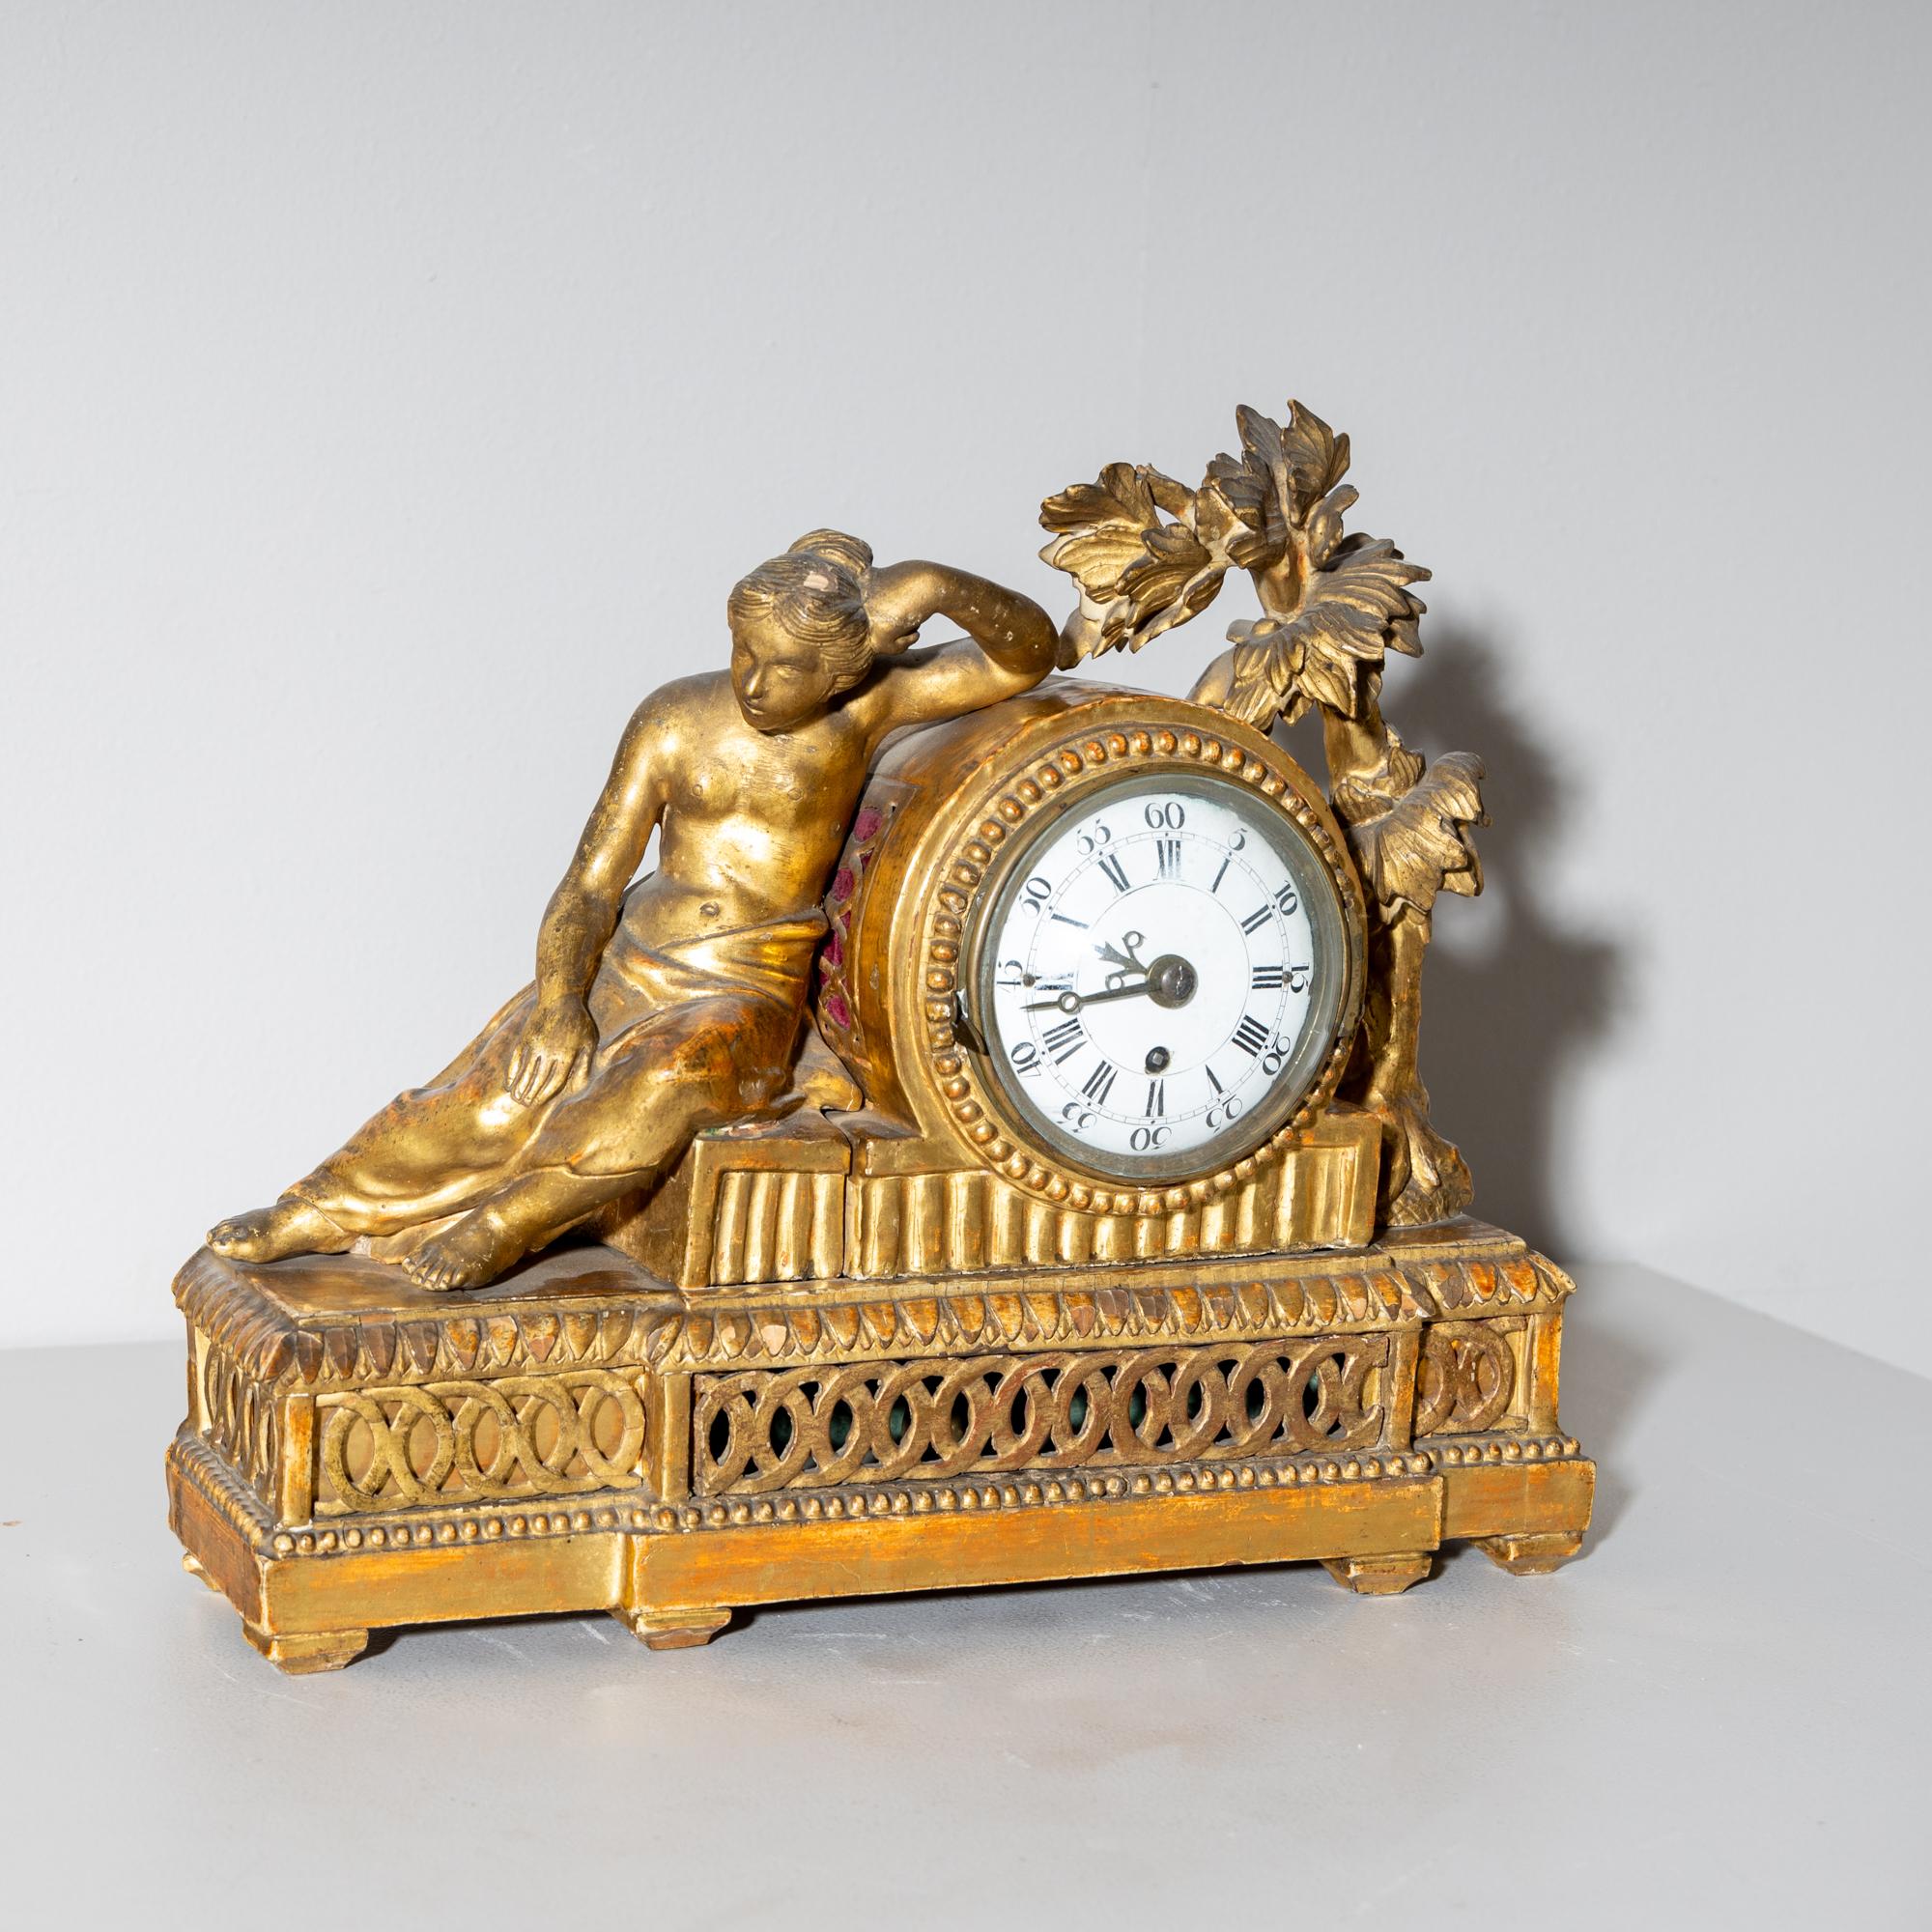 Louis XVI Louis Seize Mantel Clock in a Giltwood Case, End of 18th Century For Sale